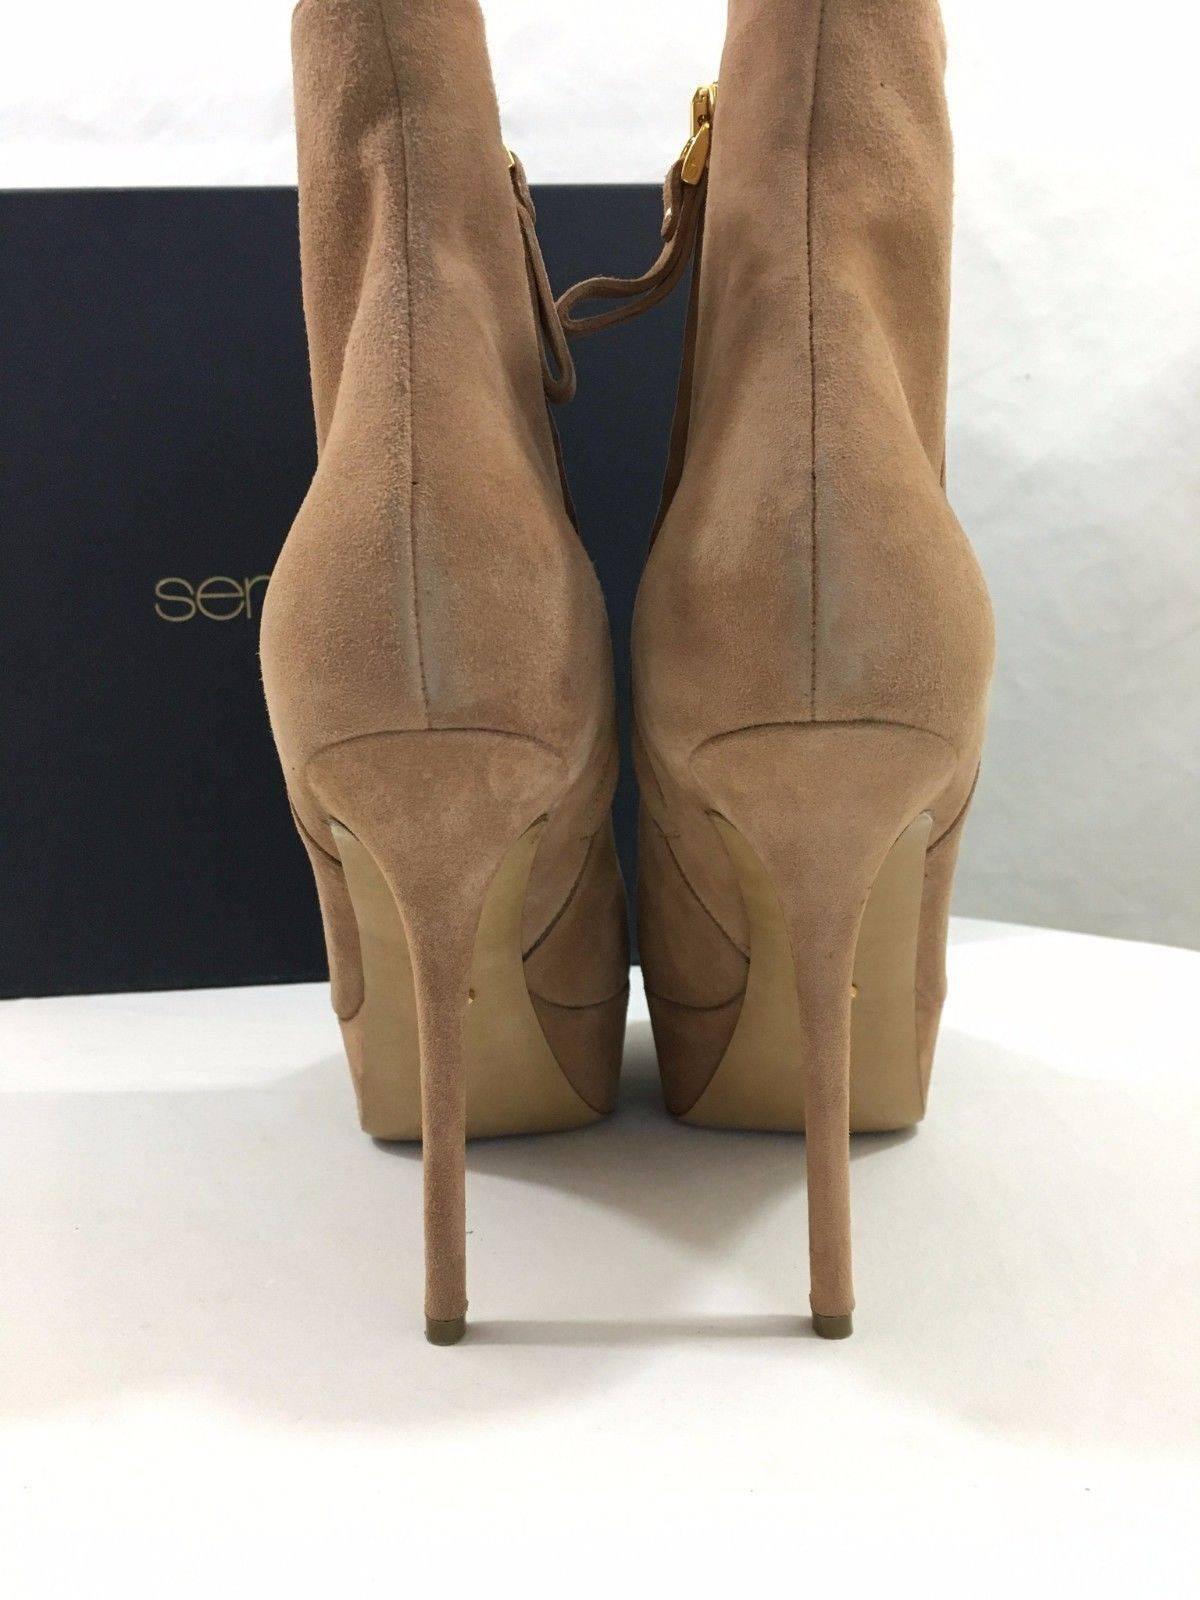 Sergio Rossi Nude Suede Stiletto Ankle Platform Boots  For Sale 3